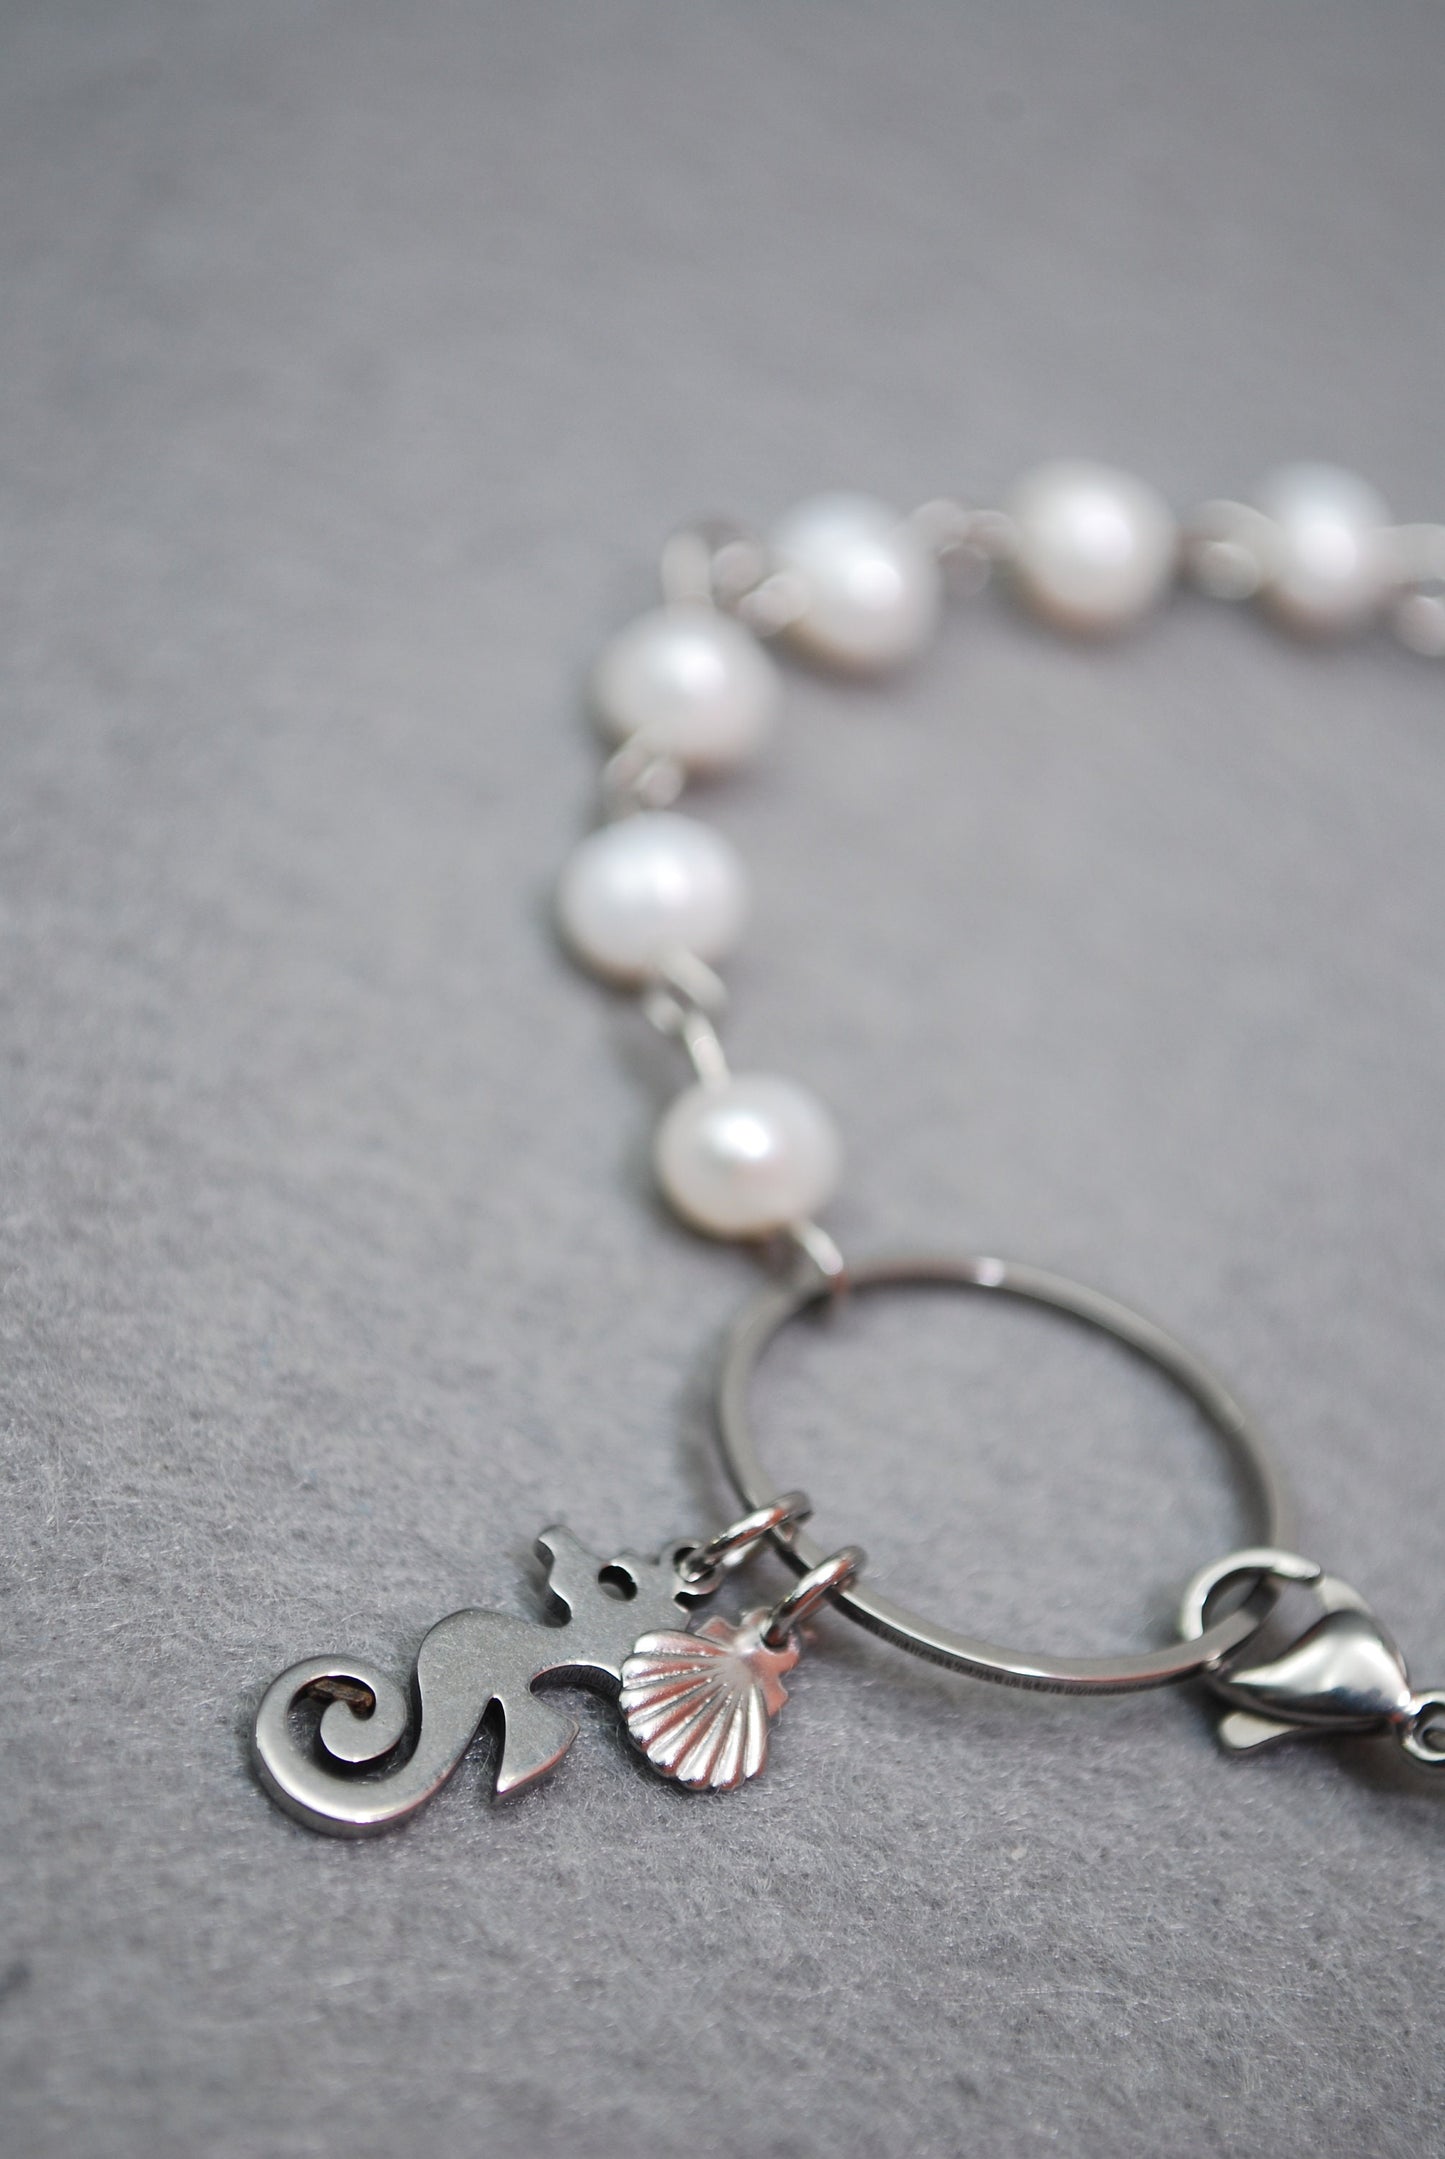 Stainless Steel Bracelet with Pearl Beads and Sea-inspired Charms: Perfect for Summer Beach Vibes!